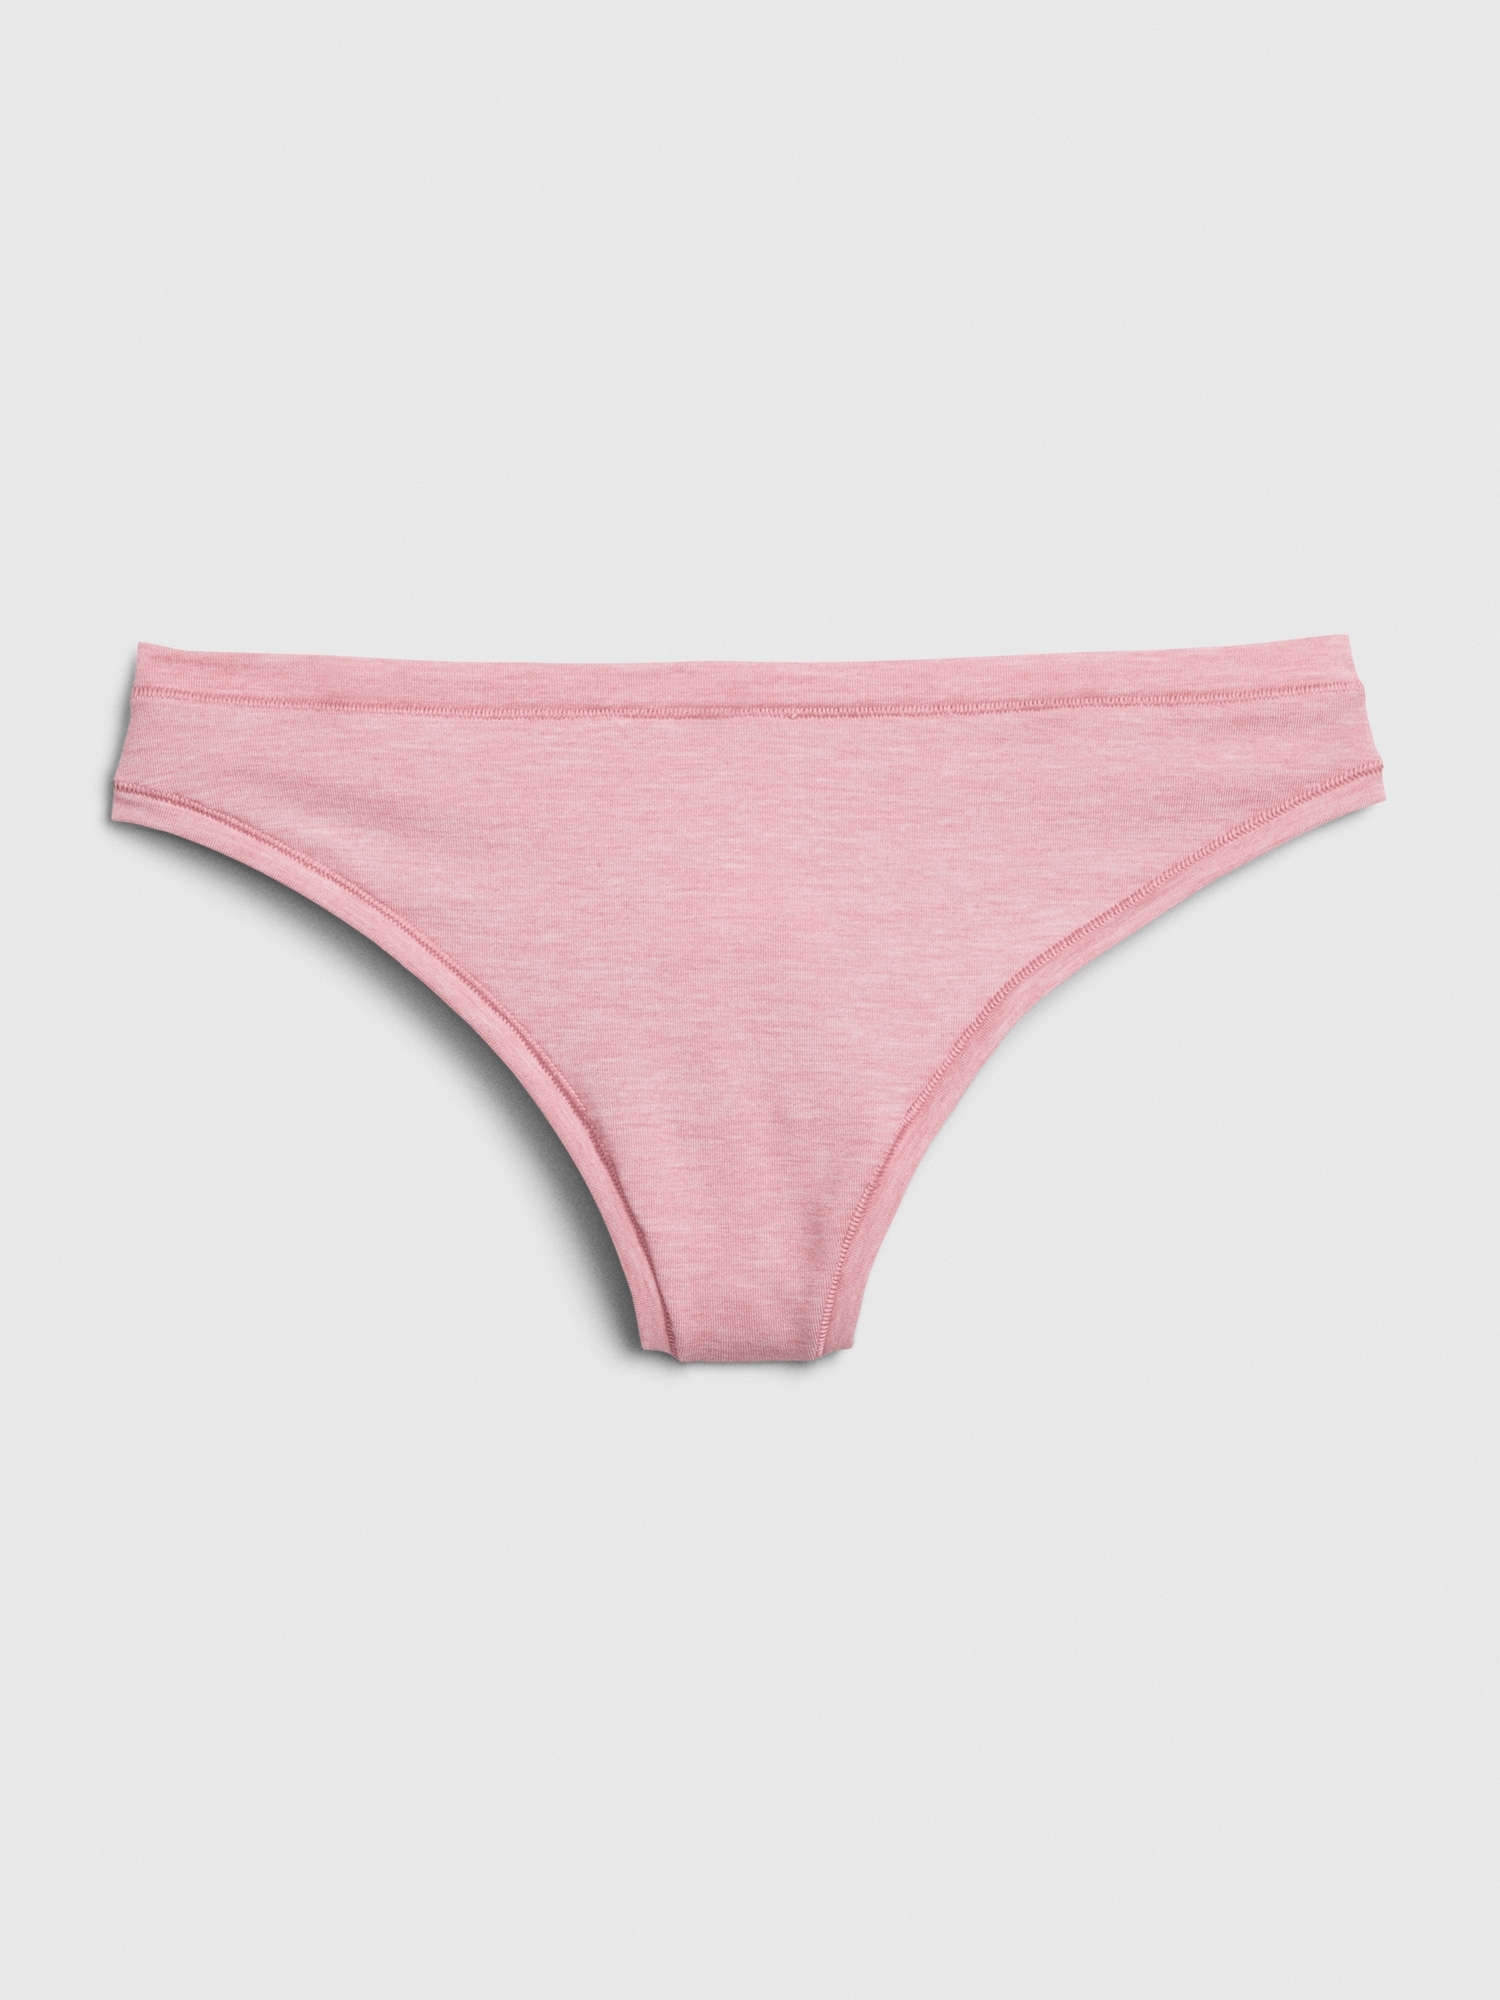 Gap Breathe Thong In Passion Pink Rose